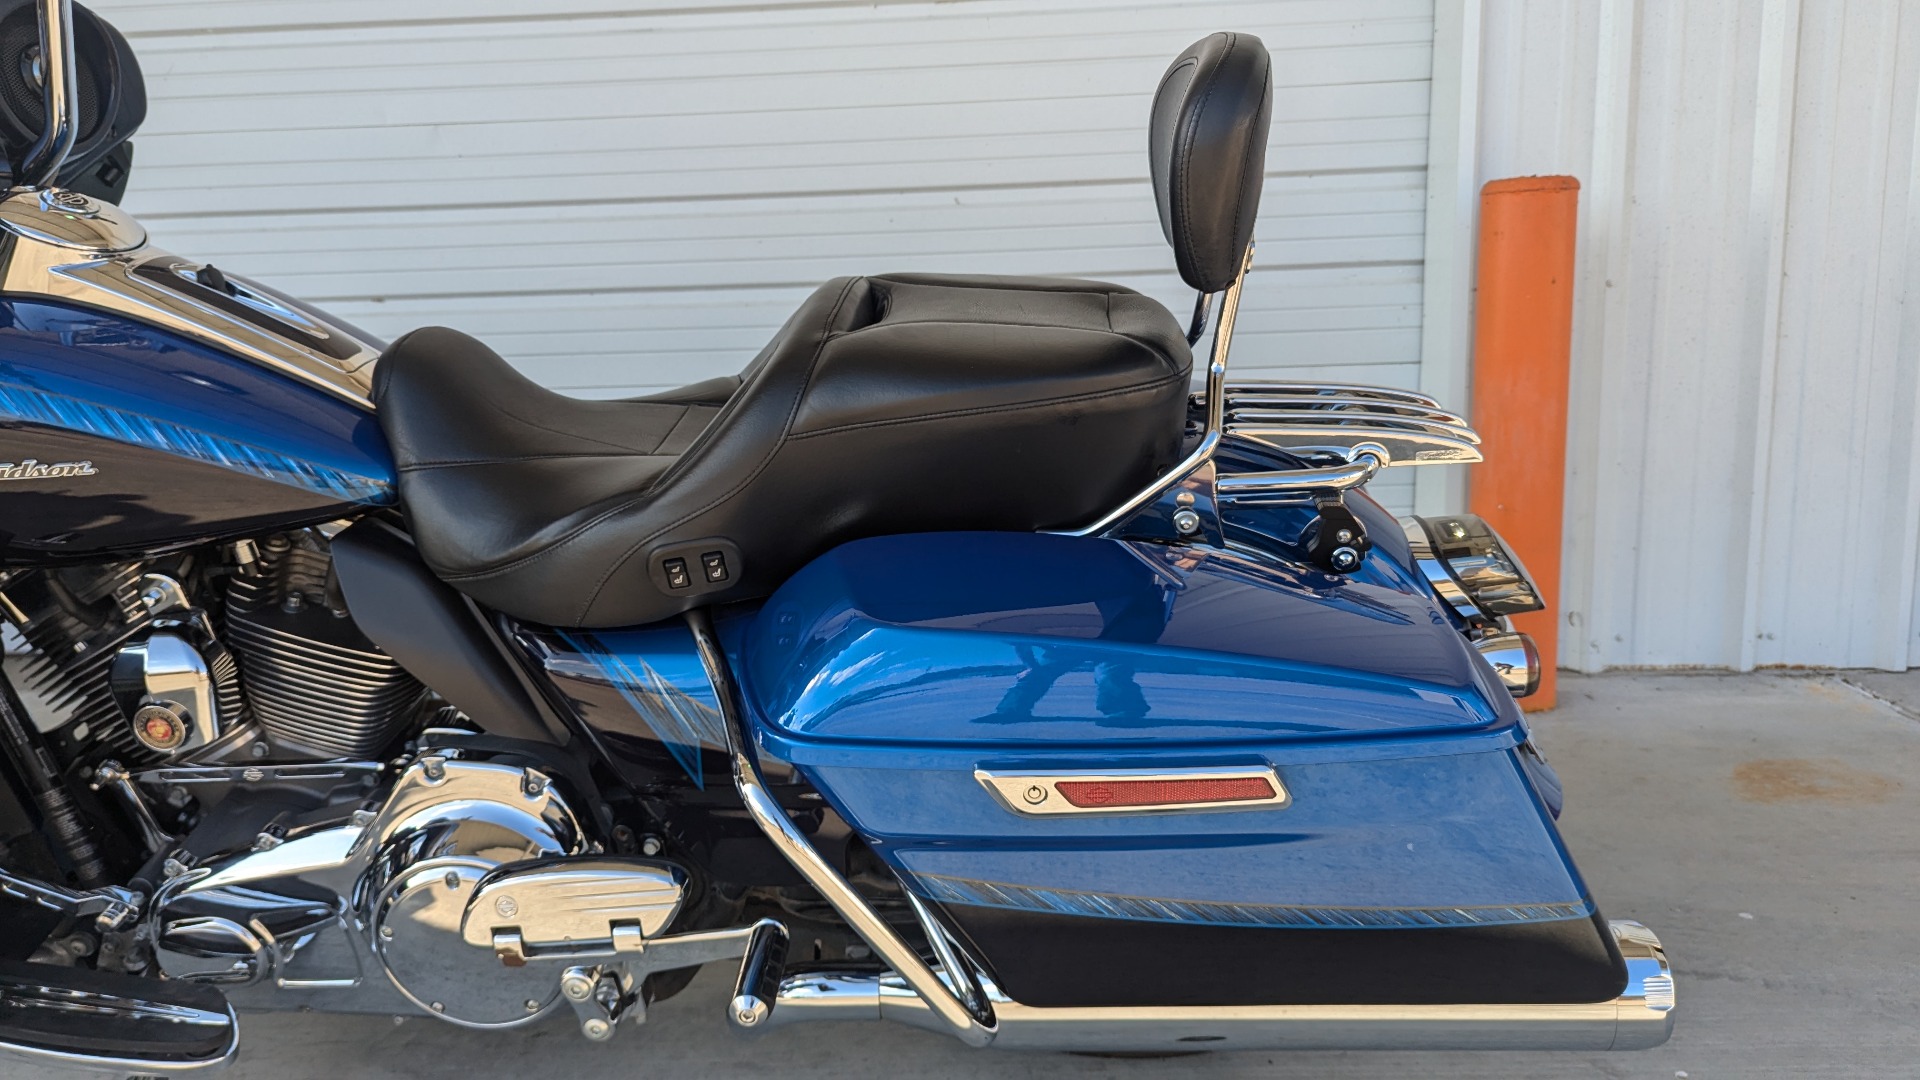 2014 Harley Davidson CVO Limited for sale in texas - Photo 8